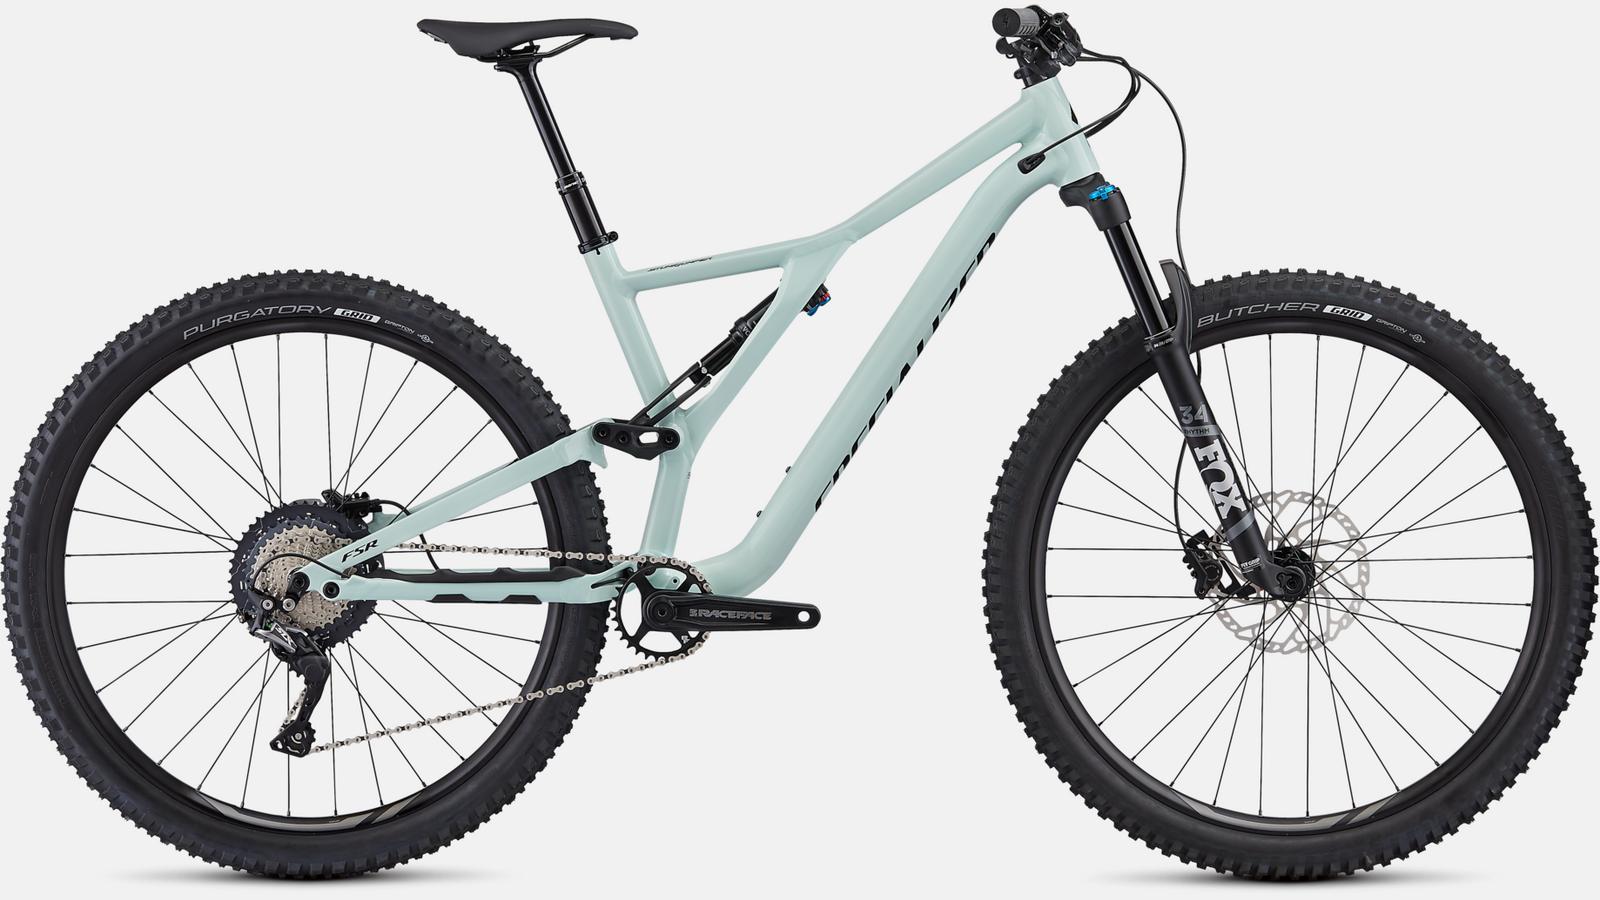 Paint for 2019 Specialized Men's Stumpjumper ST Comp Alloy 29 - Gloss White Sage